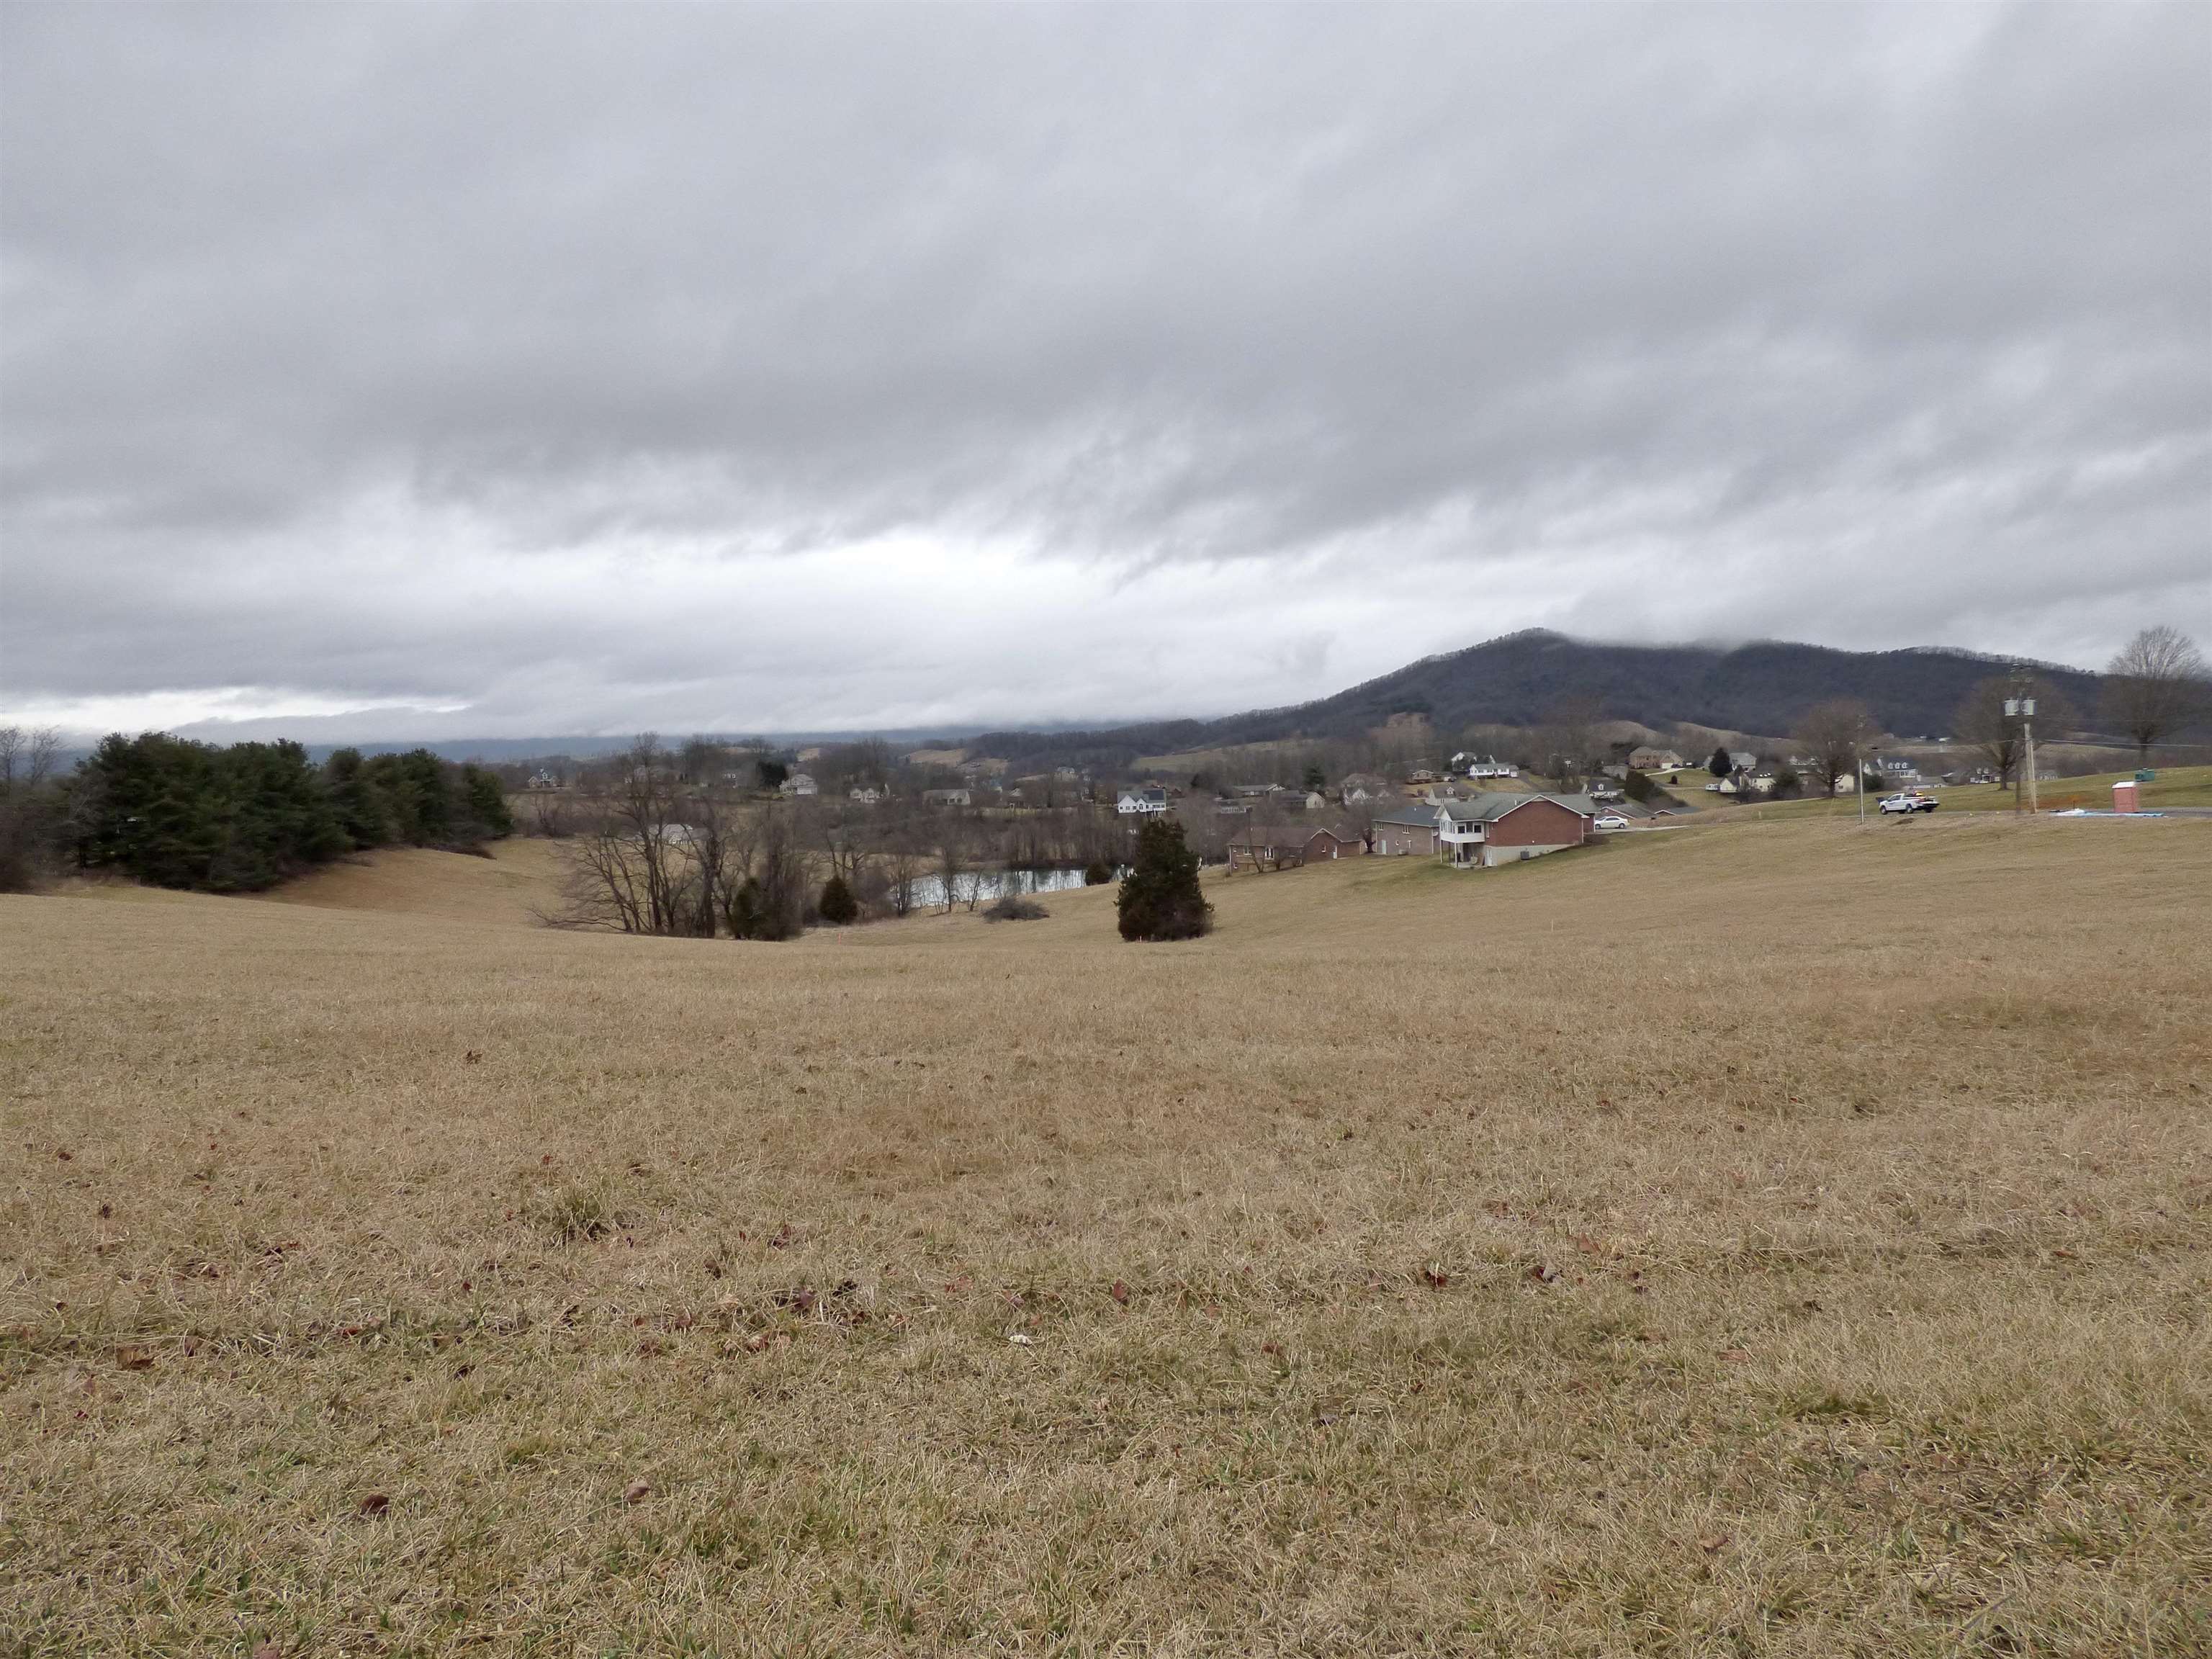 This .450-acre residential lot offers a great building site with mountain views and is zoned R1 for residential use. It's conveniently located with easy interstate access and has town water and sewer available. It is ideal for those looking to build a home in a scenic yet accessible location.